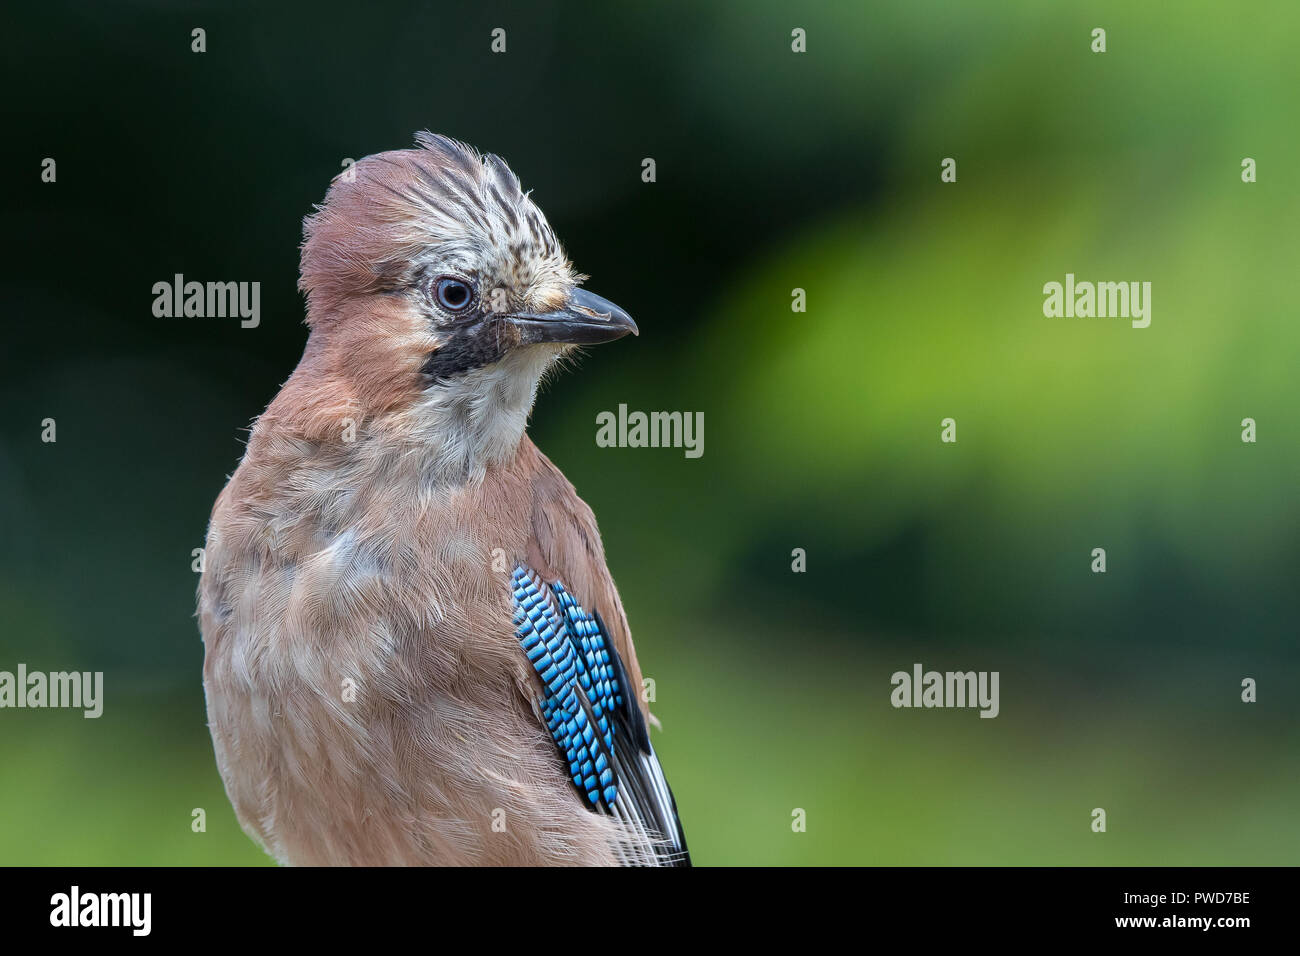 Close-up front view of wild UK juvenile jay bird (Garrulus glandarius) perching isolated outdoors, head turned looking right. Copy space. Stock Photo